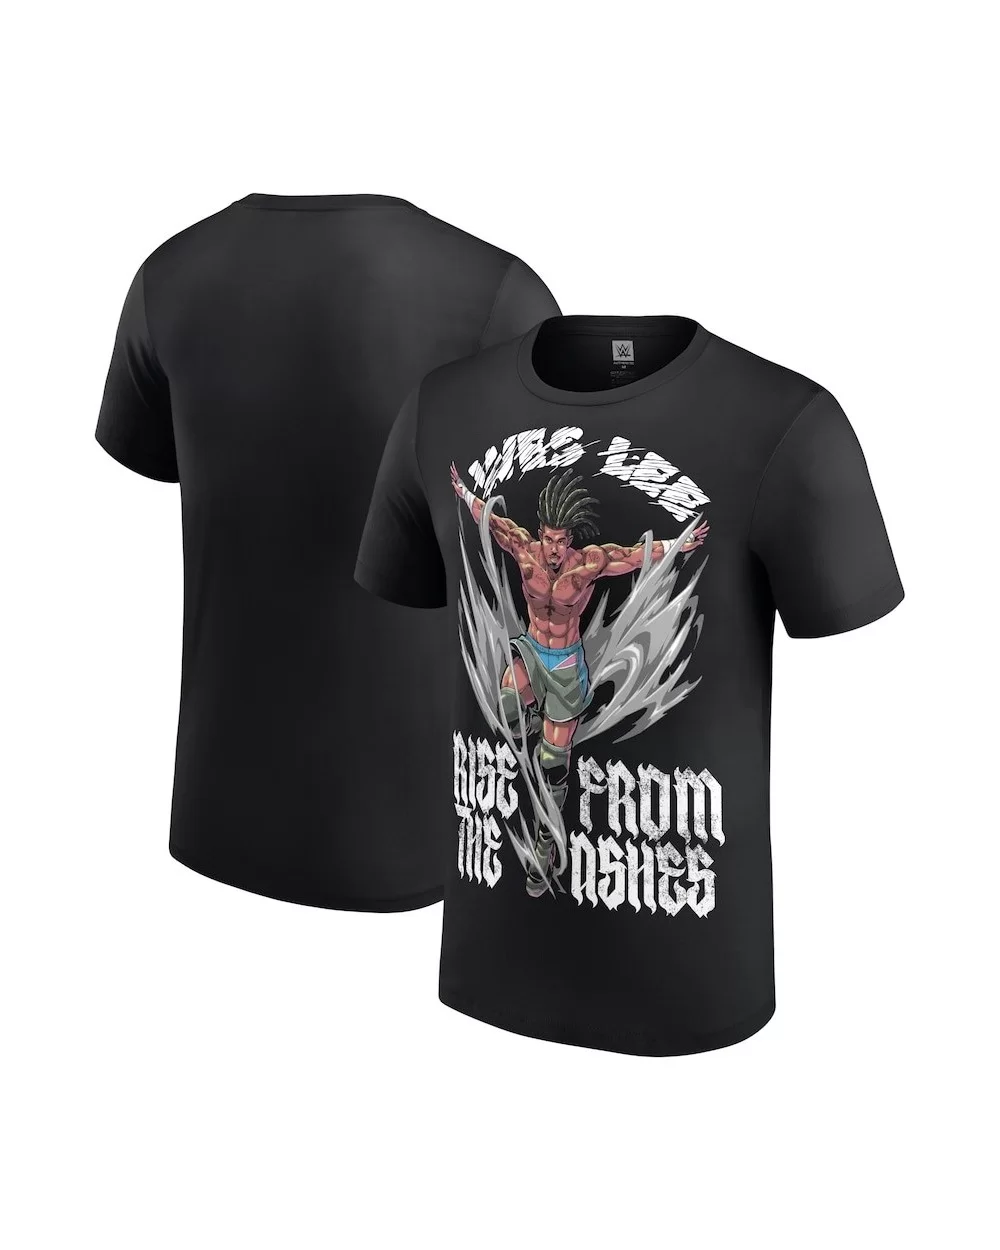 Men's Black Wes Lee Rise from the Ashes T-Shirt $8.88 T-Shirts